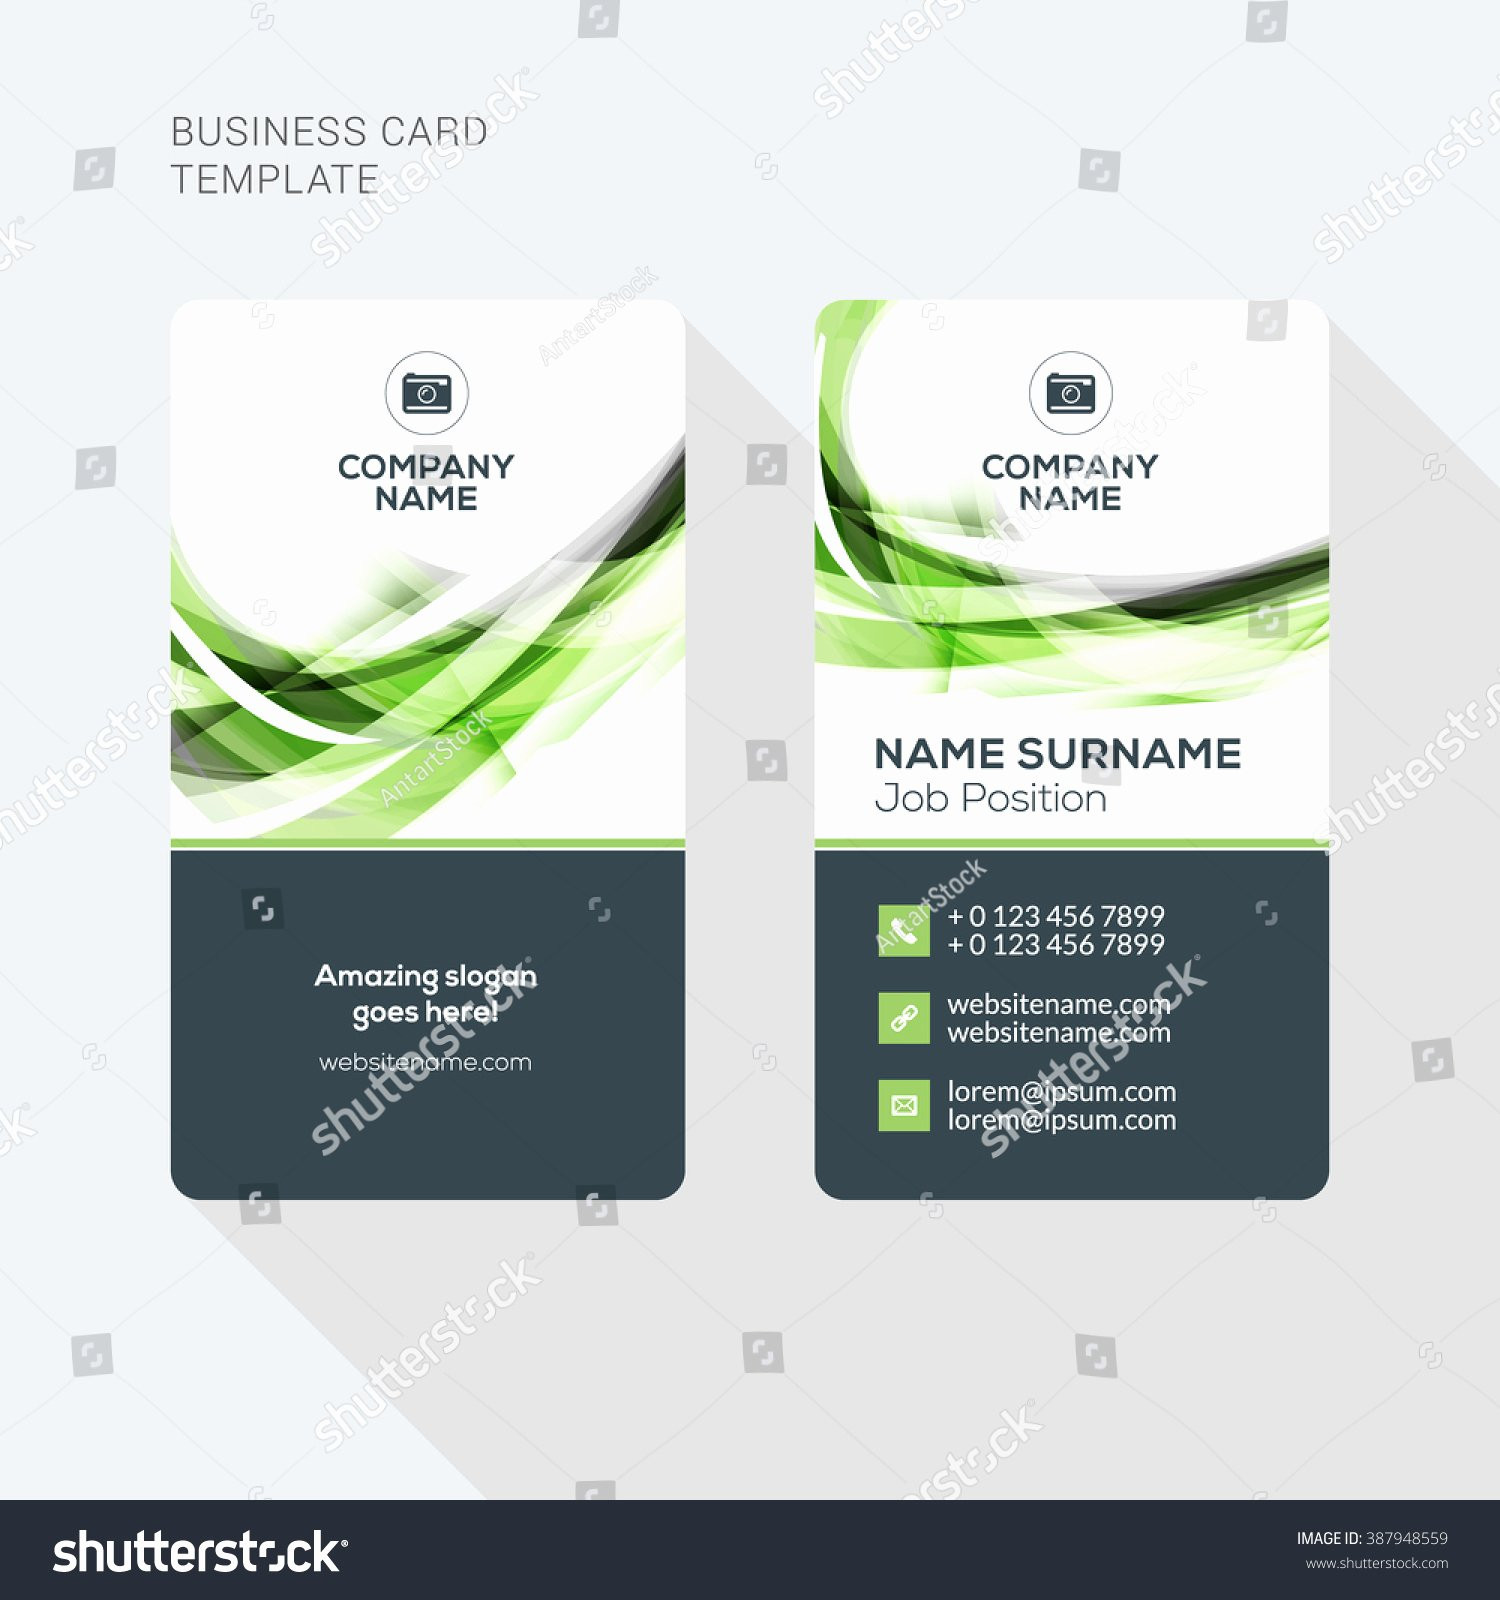 Two Sided Business Card Template Of Two Sided Business Card Template